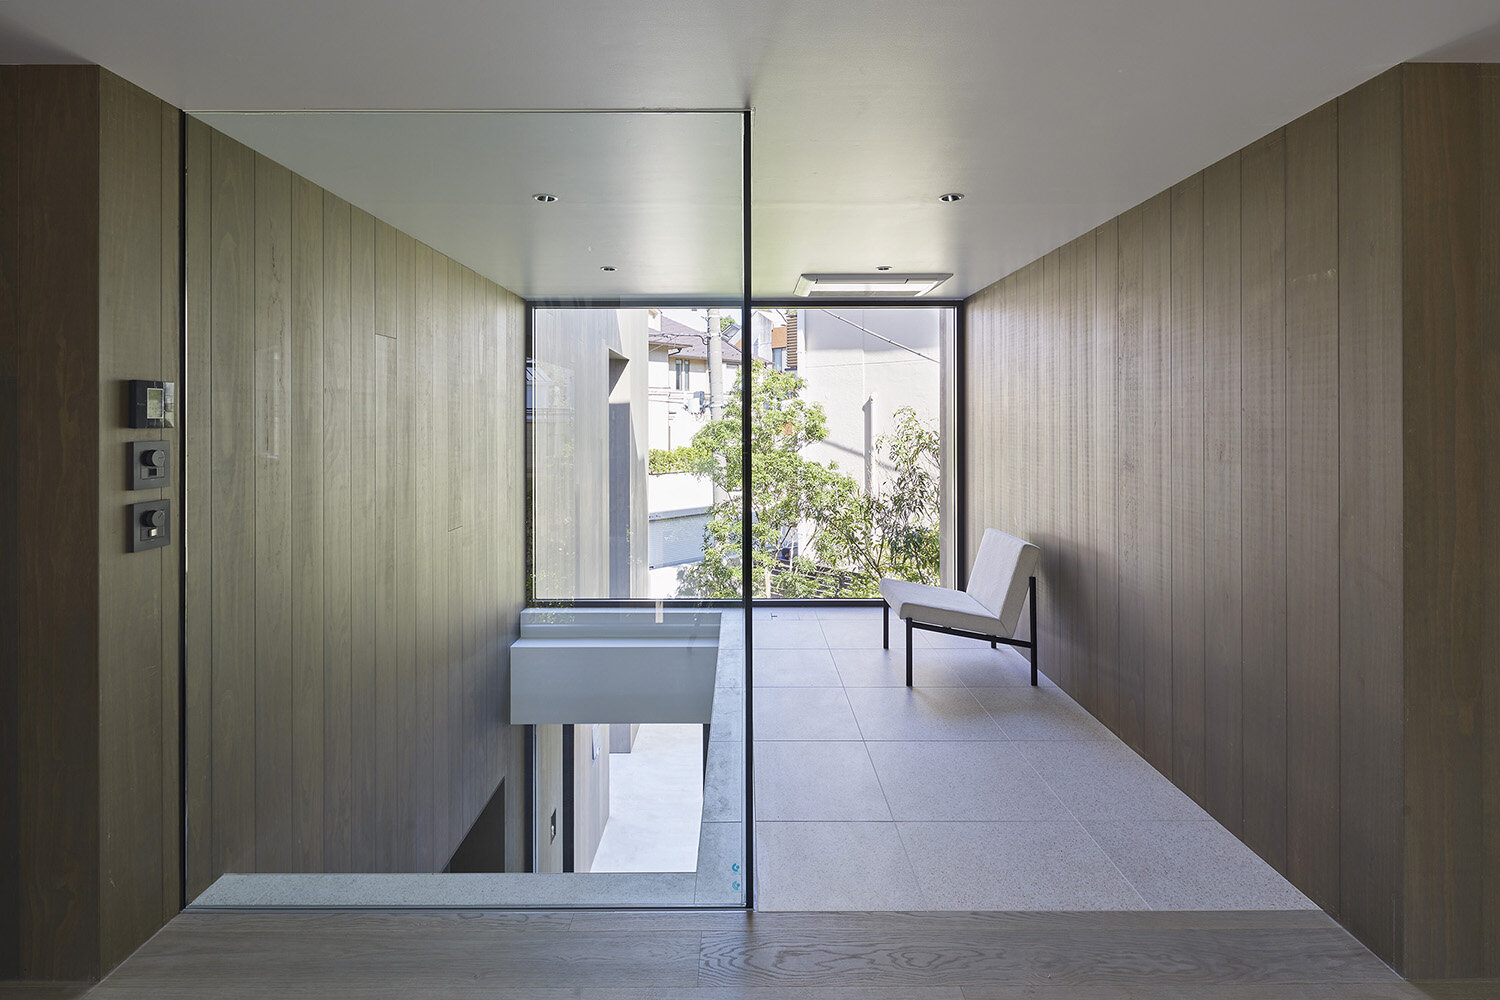  An interior design of ‘Shoto S’, a residence designed by Japanese architecture design studio SINATO led by Chikara Ono. 